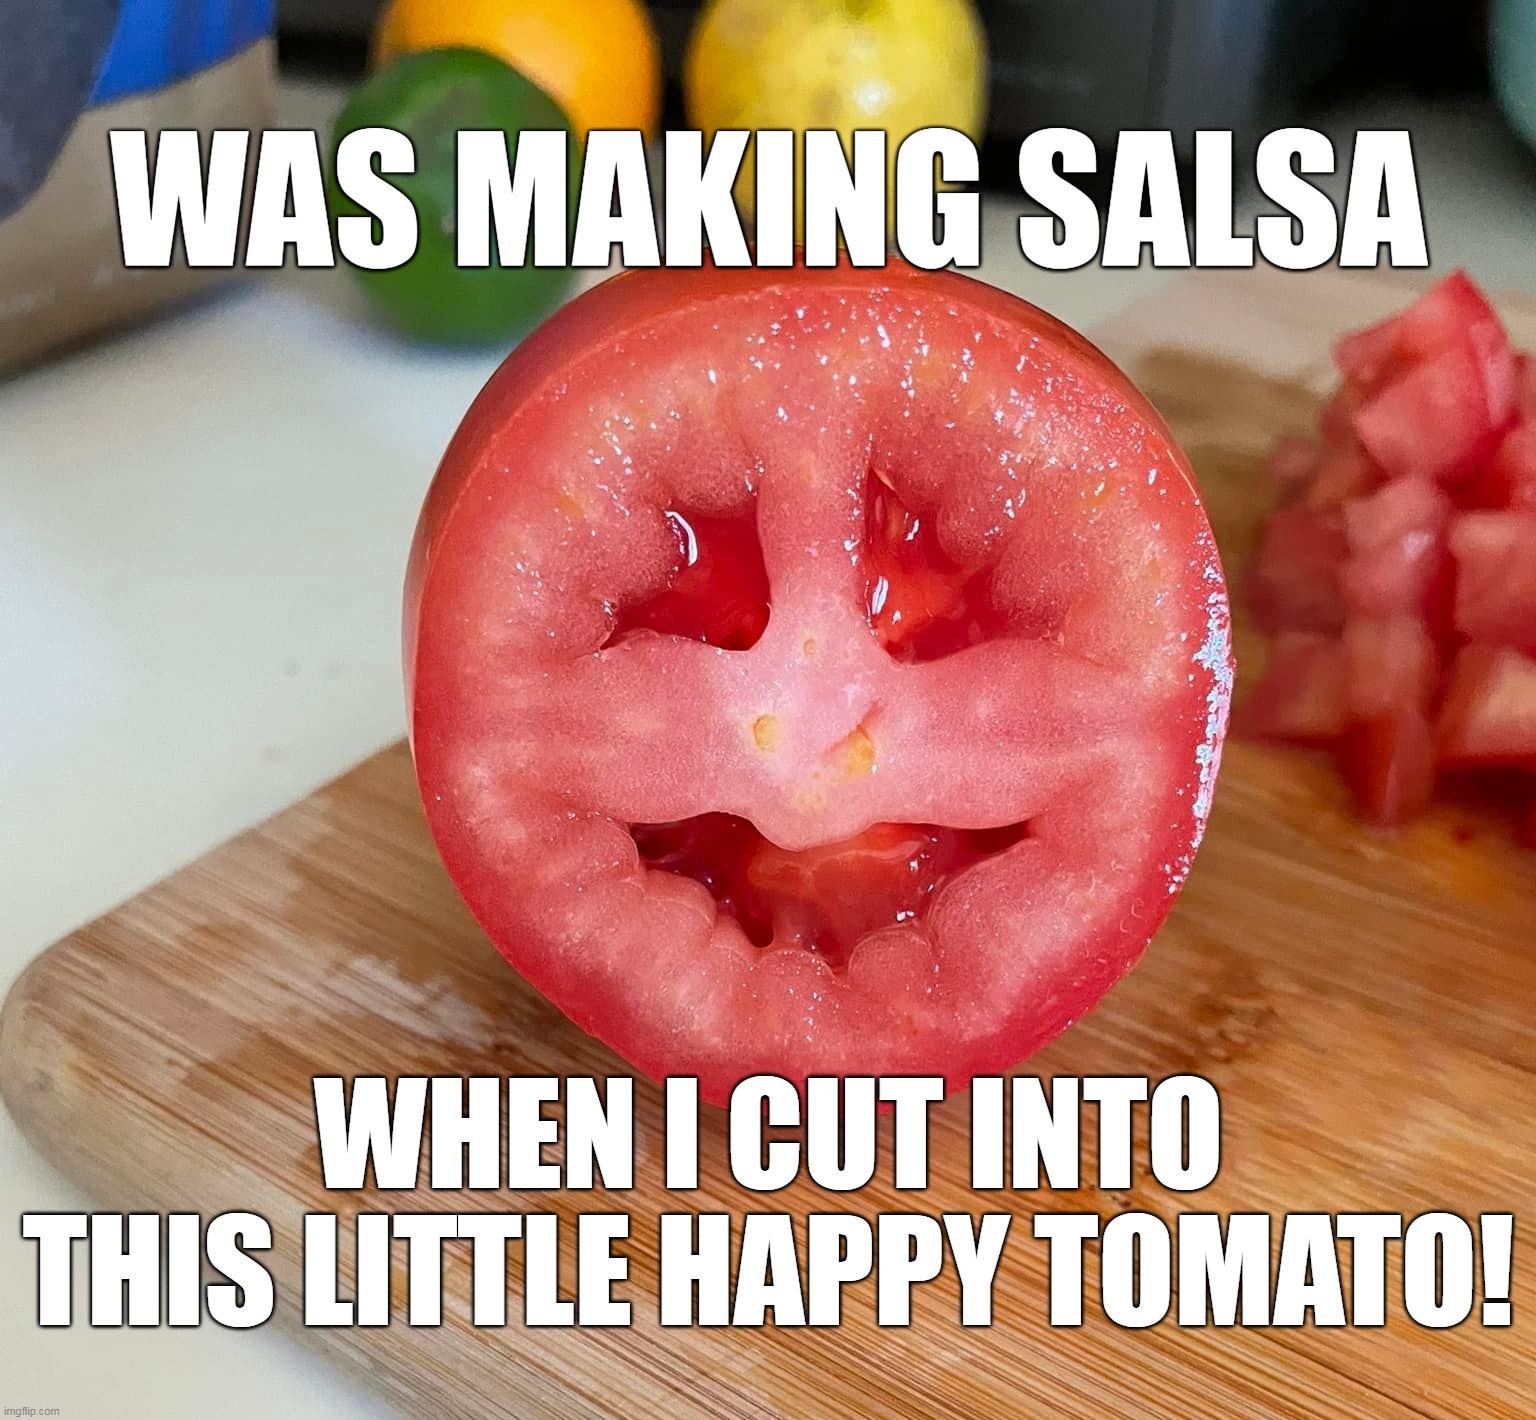 Guess Someone Likes to Dance | WAS MAKING SALSA; WHEN I CUT INTO THIS LITTLE HAPPY TOMATO! | image tagged in meme,memes,humor | made w/ Imgflip meme maker